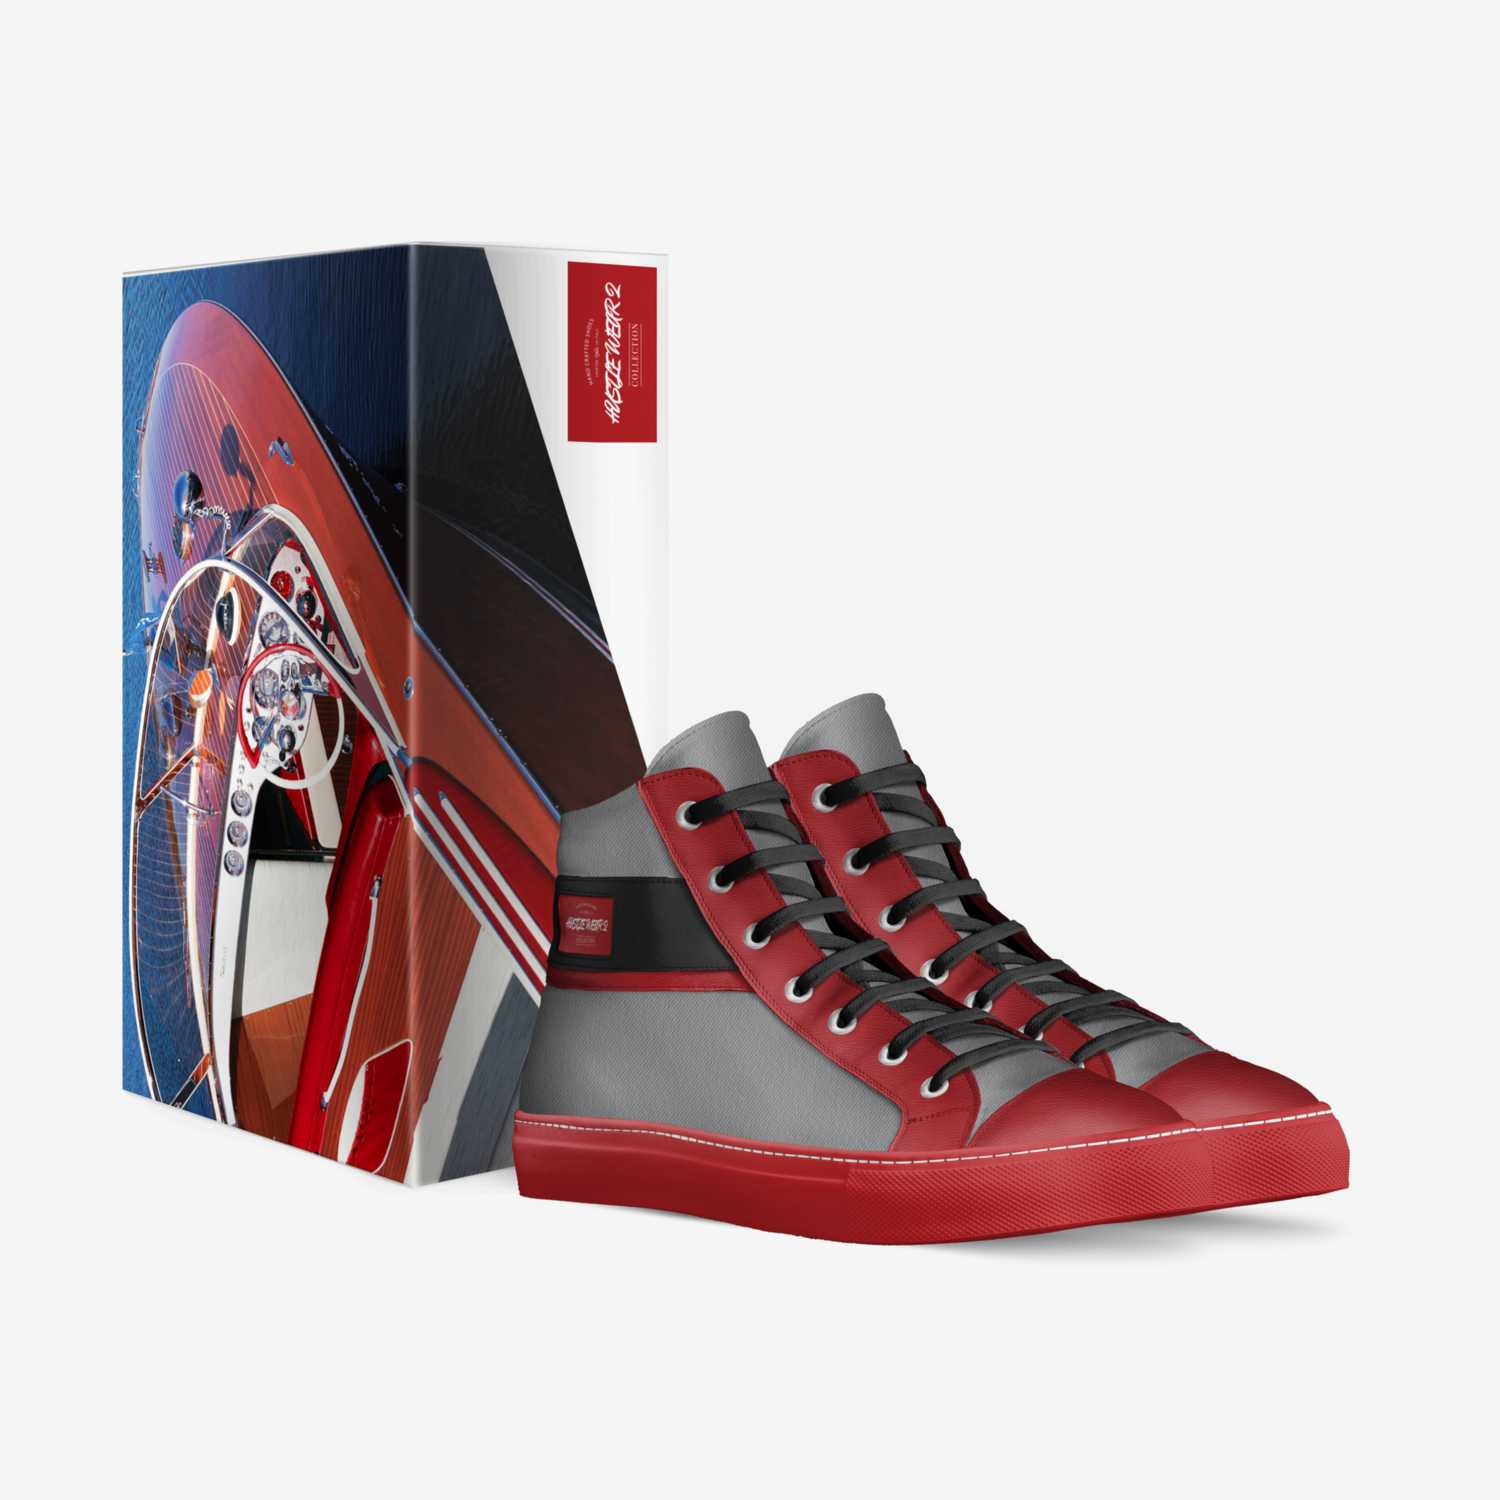 HUSTLE WEAR 2 custom made in Italy shoes by Thomas Granger | Box view